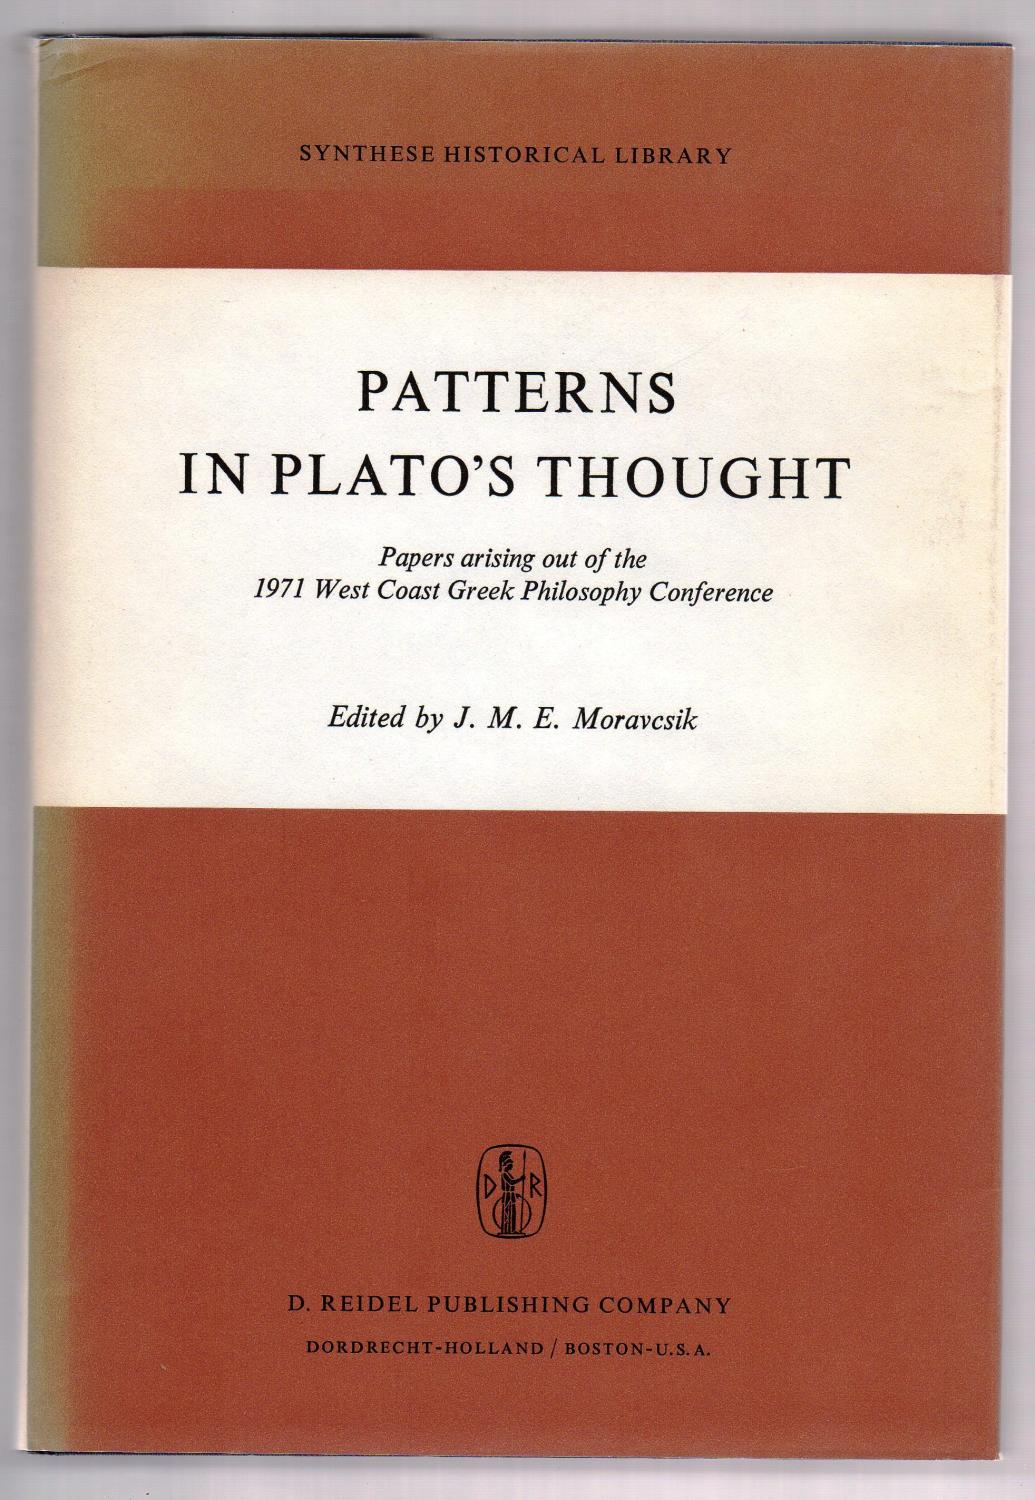 Patterns in Plato's Thought: Papers arising out of the 1971 West Coast Greek Philosophy Conference - MORAVCSIK, J. M. E.